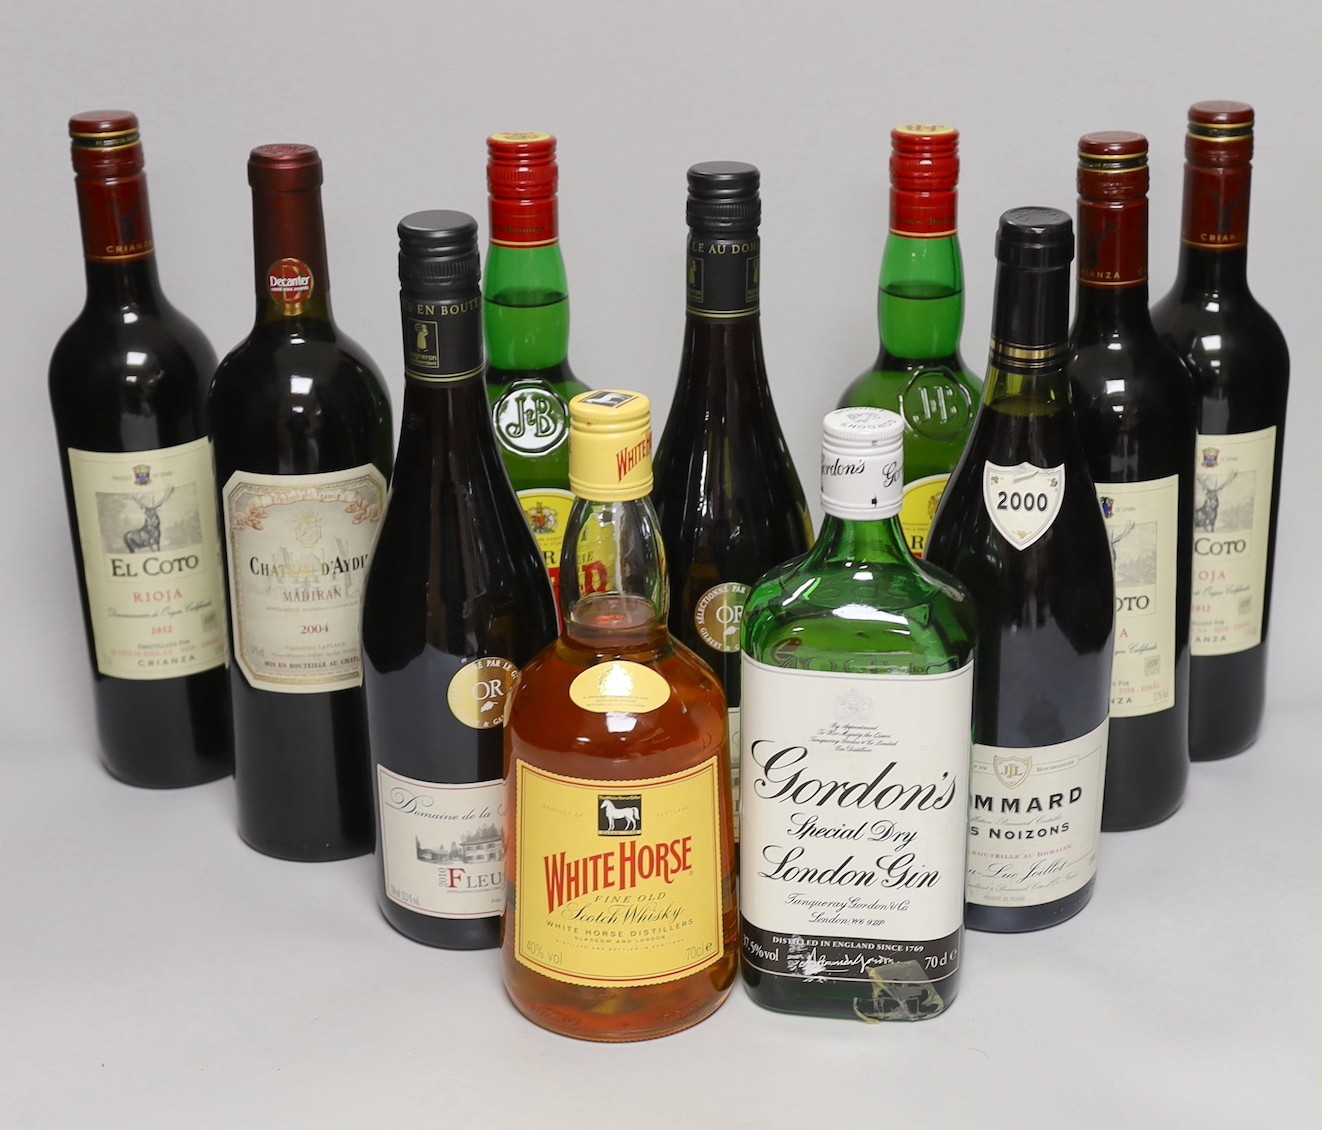 A quantity wine and spirits including Fleurie, Pommard, El Coto Rioja, Chateau D’Aydie, Gordons, J&B and White Horse